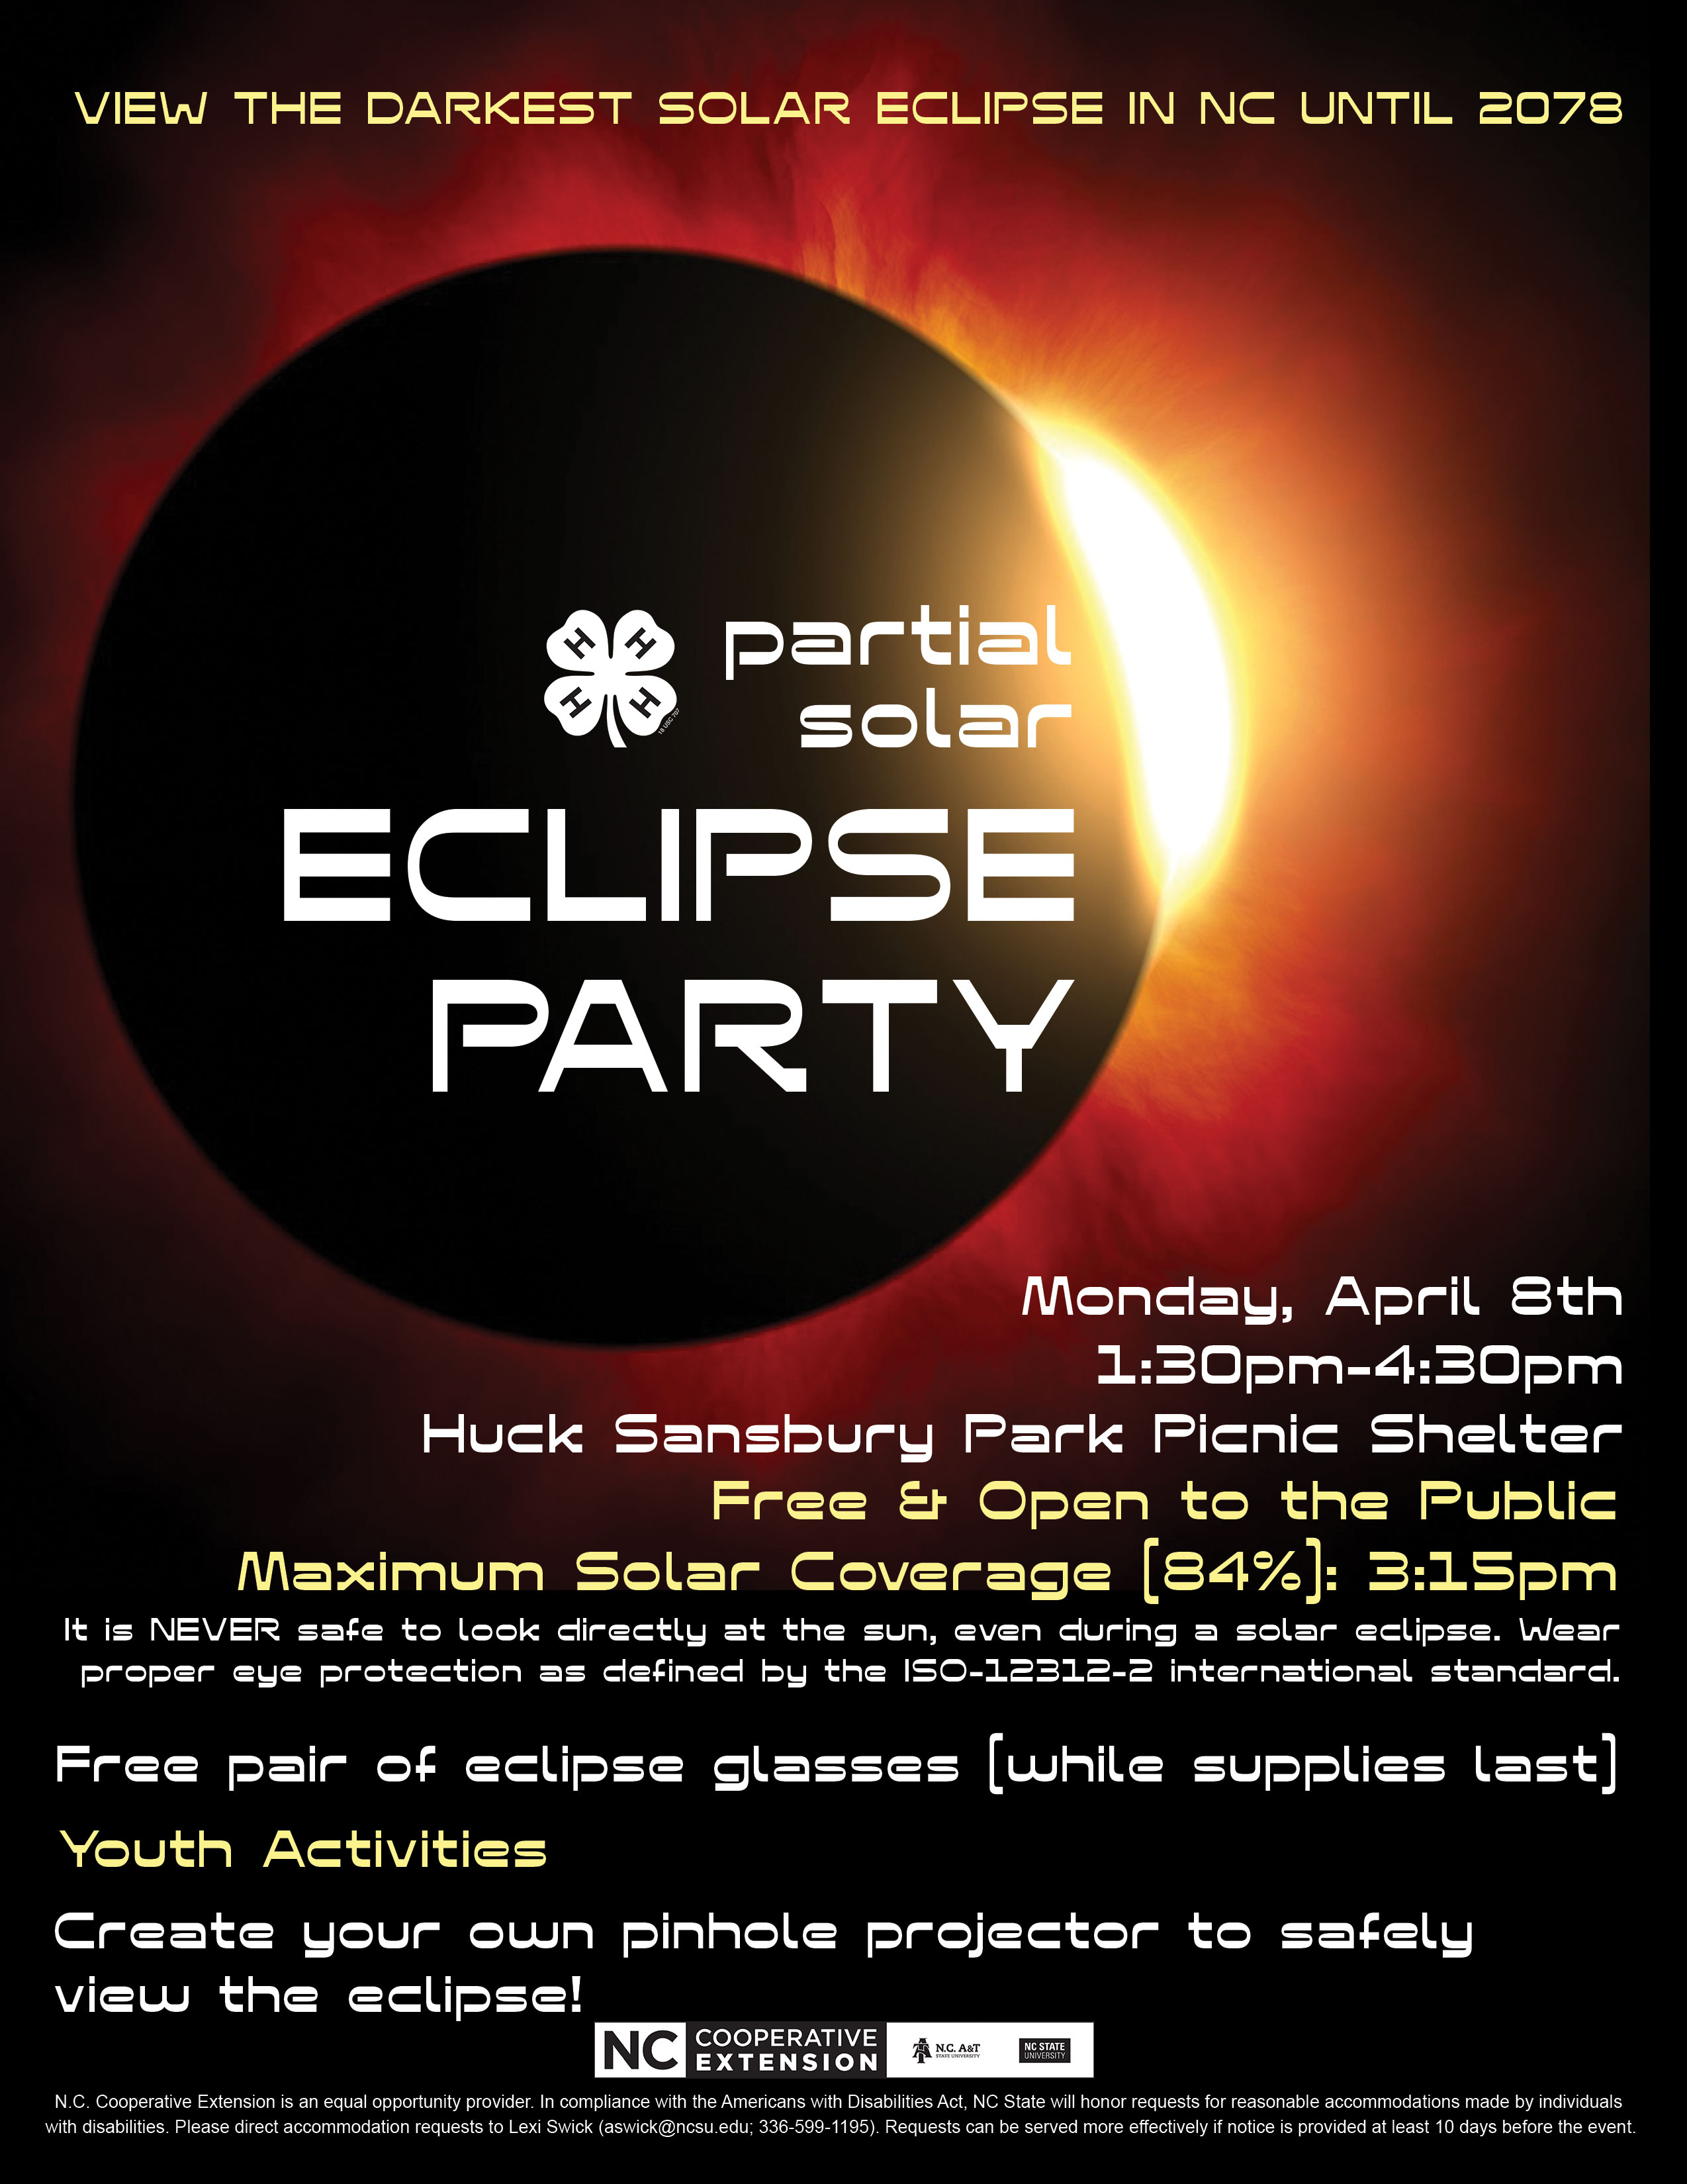 On April 8, view the darkest solar eclipse in NC until 2078! Contact 4-H Agent Lexi Swick at 3365991195 or aswick@ncsu.edu for more info.